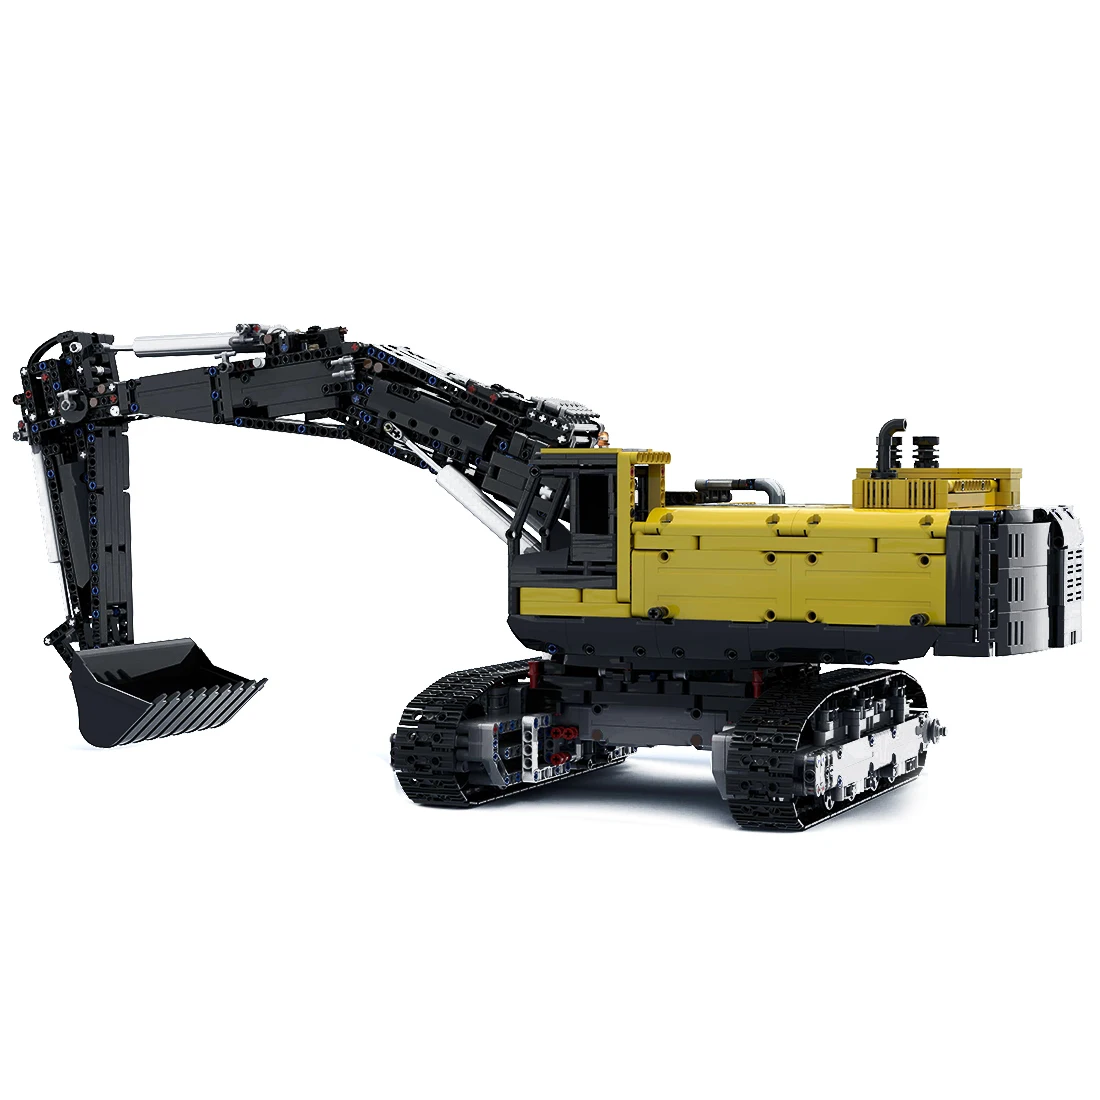 

3797+Pcs MOC-43636 Engineering Series 2020 Volvo Excavator Small Particle Building Block (Licensed and Designed by Flybum60)